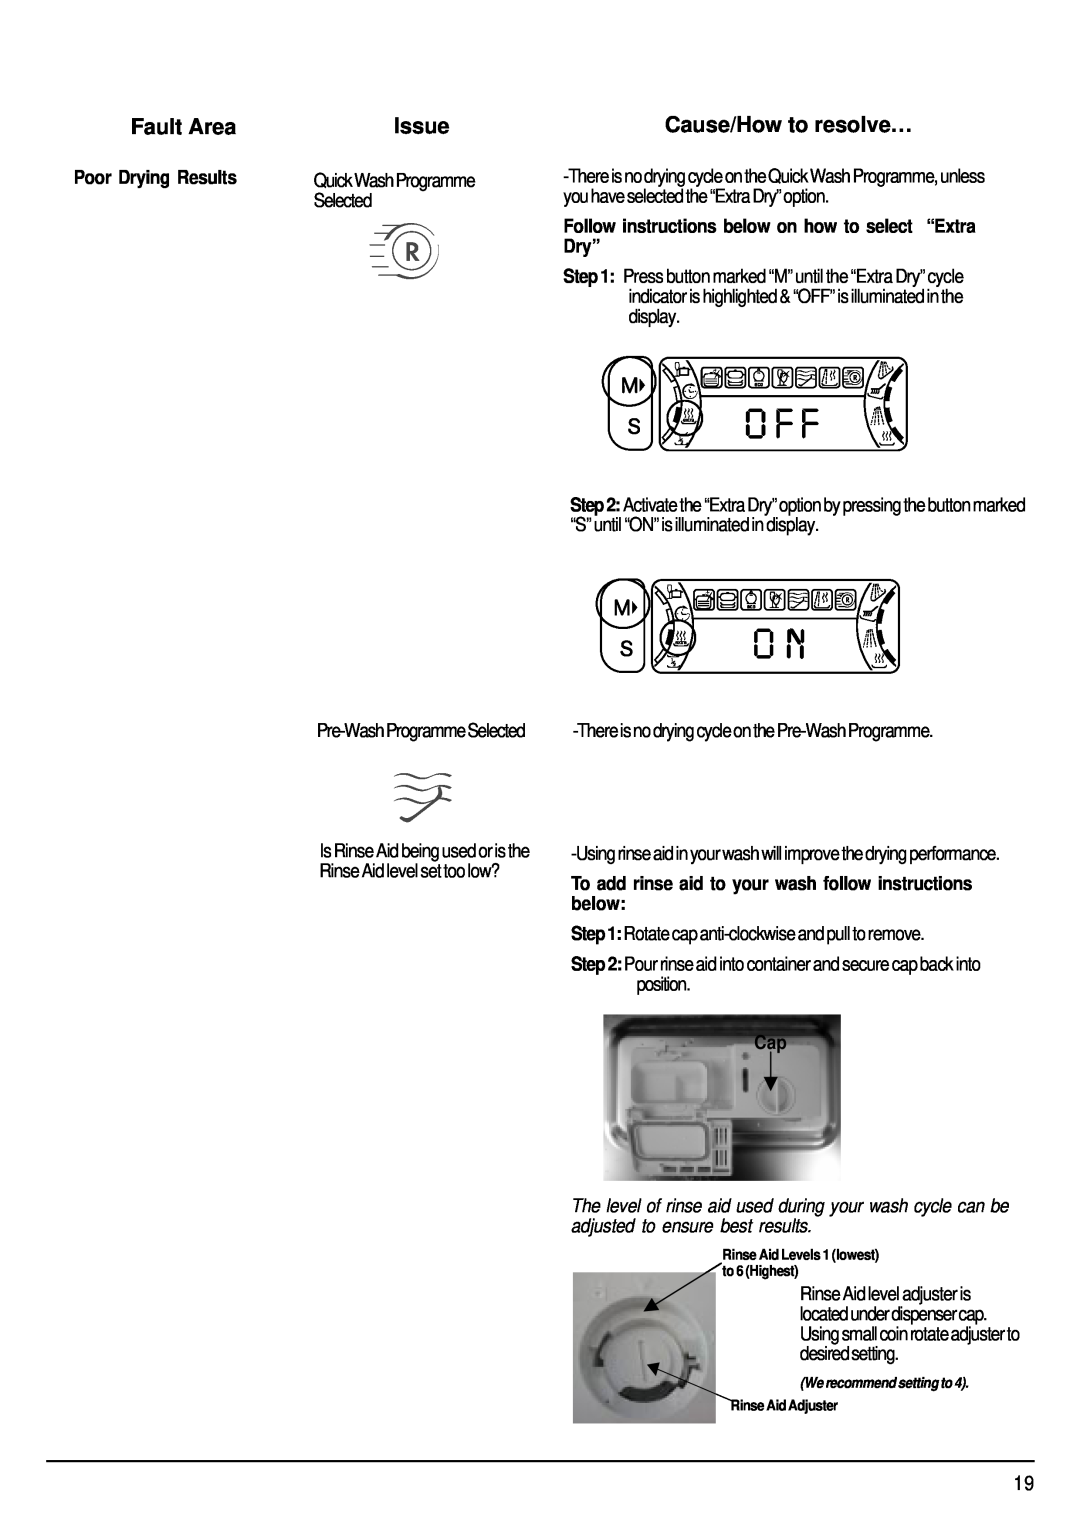 Hotpoint FDW85 manual Fault Area, Issue, Cause/How to resolve…, Poor Drying Results 